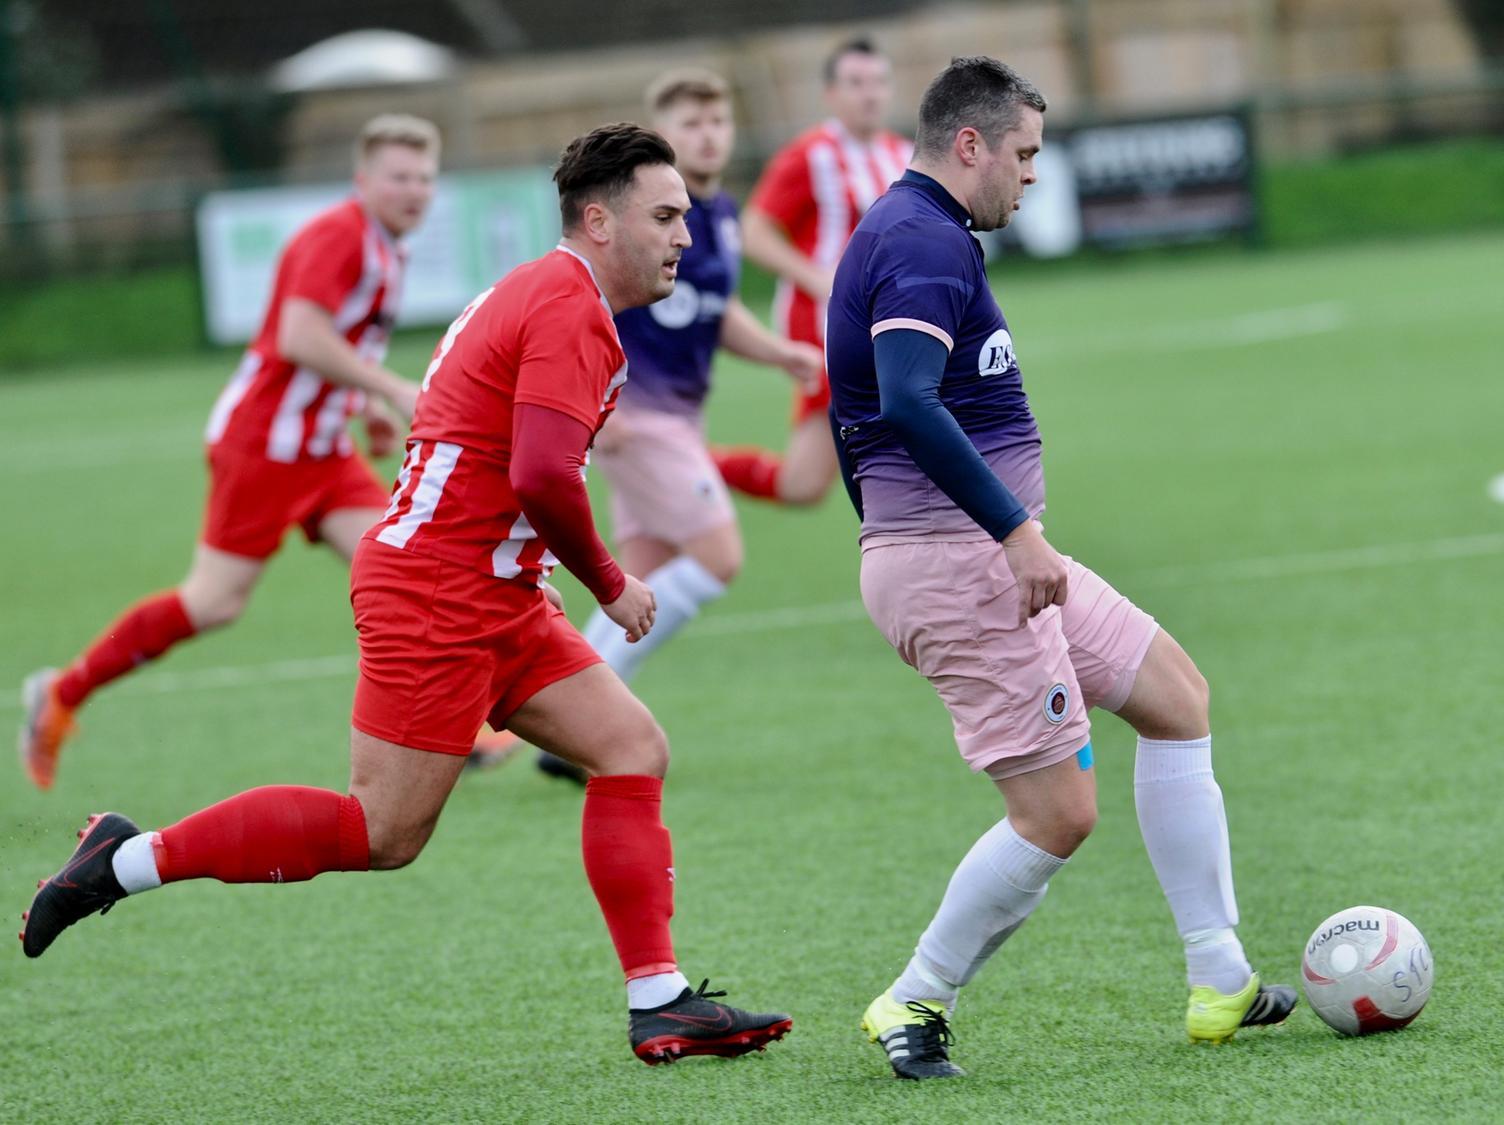 Action from Steyning Town v Alfold